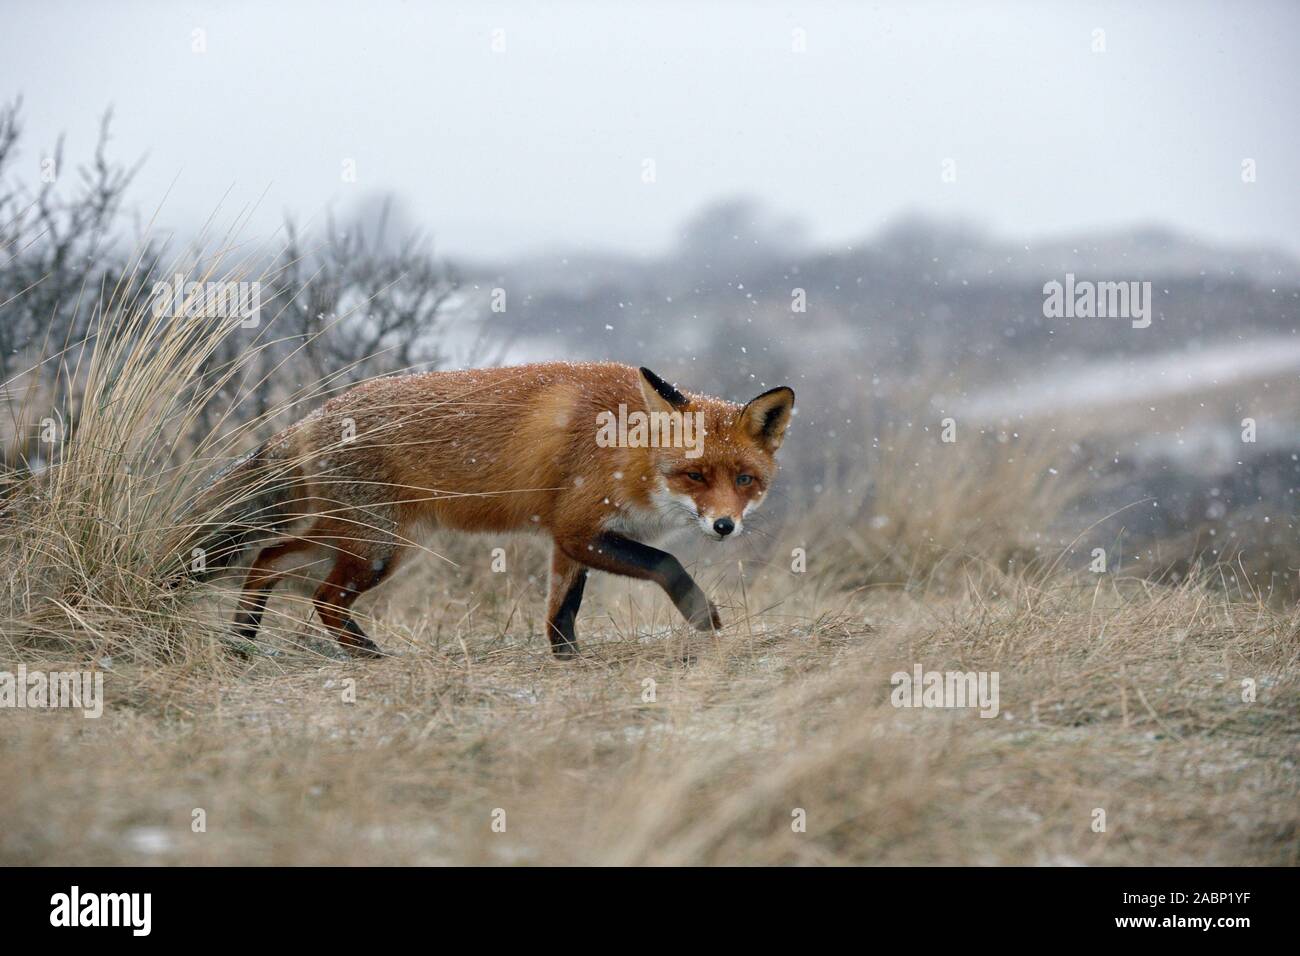 Red Fox ( Vulpes vulpes ), cunning fox, sneaking through grass over a hill, falling snow, winter, typical behavior, wildlife, Europe. Stock Photo